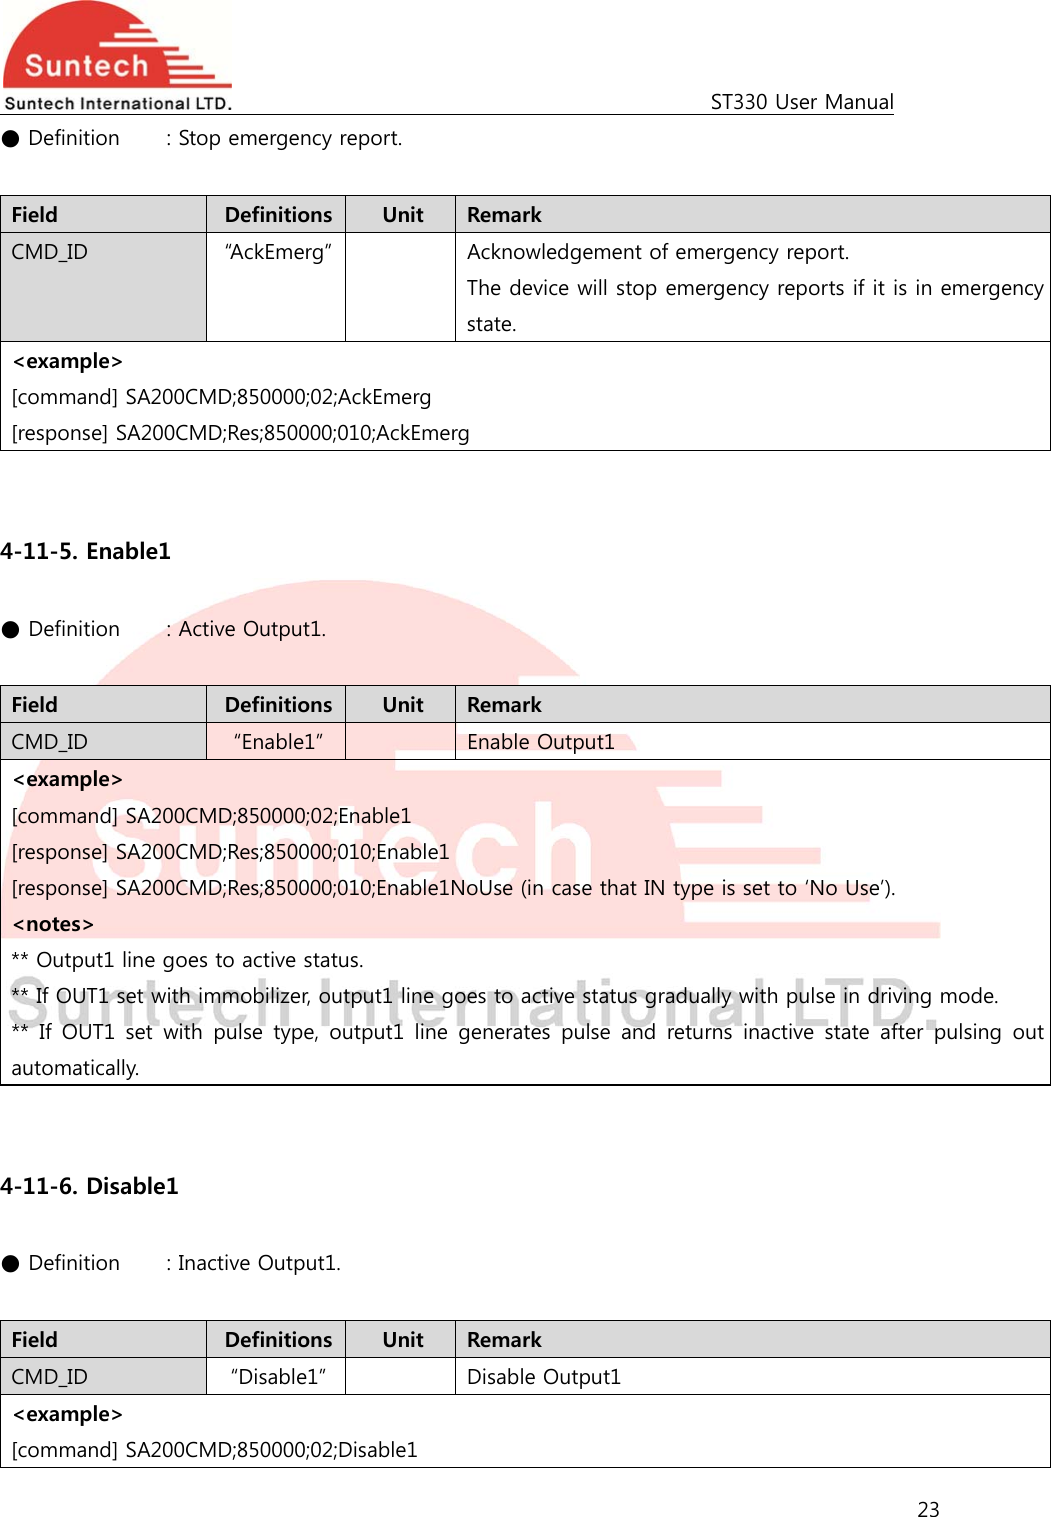                                                                                             ST330 User Manual 23  ● Definition    : Stop emergency report.  Field  Definitions  Unit  Remark CMD_ID  “AckEmerg”    Acknowledgement of emergency report. The device will stop emergency reports if it is in emergency state. &lt;example&gt; [command] SA200CMD;850000;02;AckEmerg [response] SA200CMD;Res;850000;010;AckEmerg   4-11-5. Enable1  ● Definition   : Active Output1.  Field  Definitions  Unit  Remark CMD_ID  “Enable1”    Enable Output1 &lt;example&gt; [command] SA200CMD;850000;02;Enable1 [response] SA200CMD;Res;850000;010;Enable1 [response] SA200CMD;Res;850000;010;Enable1NoUse (in case that IN type is set to ‘No Use’). &lt;notes&gt; ** Output1 line goes to active status. ** If OUT1 set with immobilizer, output1 line goes to active status gradually with pulse in driving mode. ** If OUT1 set with pulse type, output1 line generates pulse and returns inactive state after pulsing out automatically.   4-11-6. Disable1  ● Definition   : Inactive Output1.  Field  Definitions  Unit  Remark CMD_ID  “Disable1”    Disable Output1 &lt;example&gt; [command] SA200CMD;850000;02;Disable1 